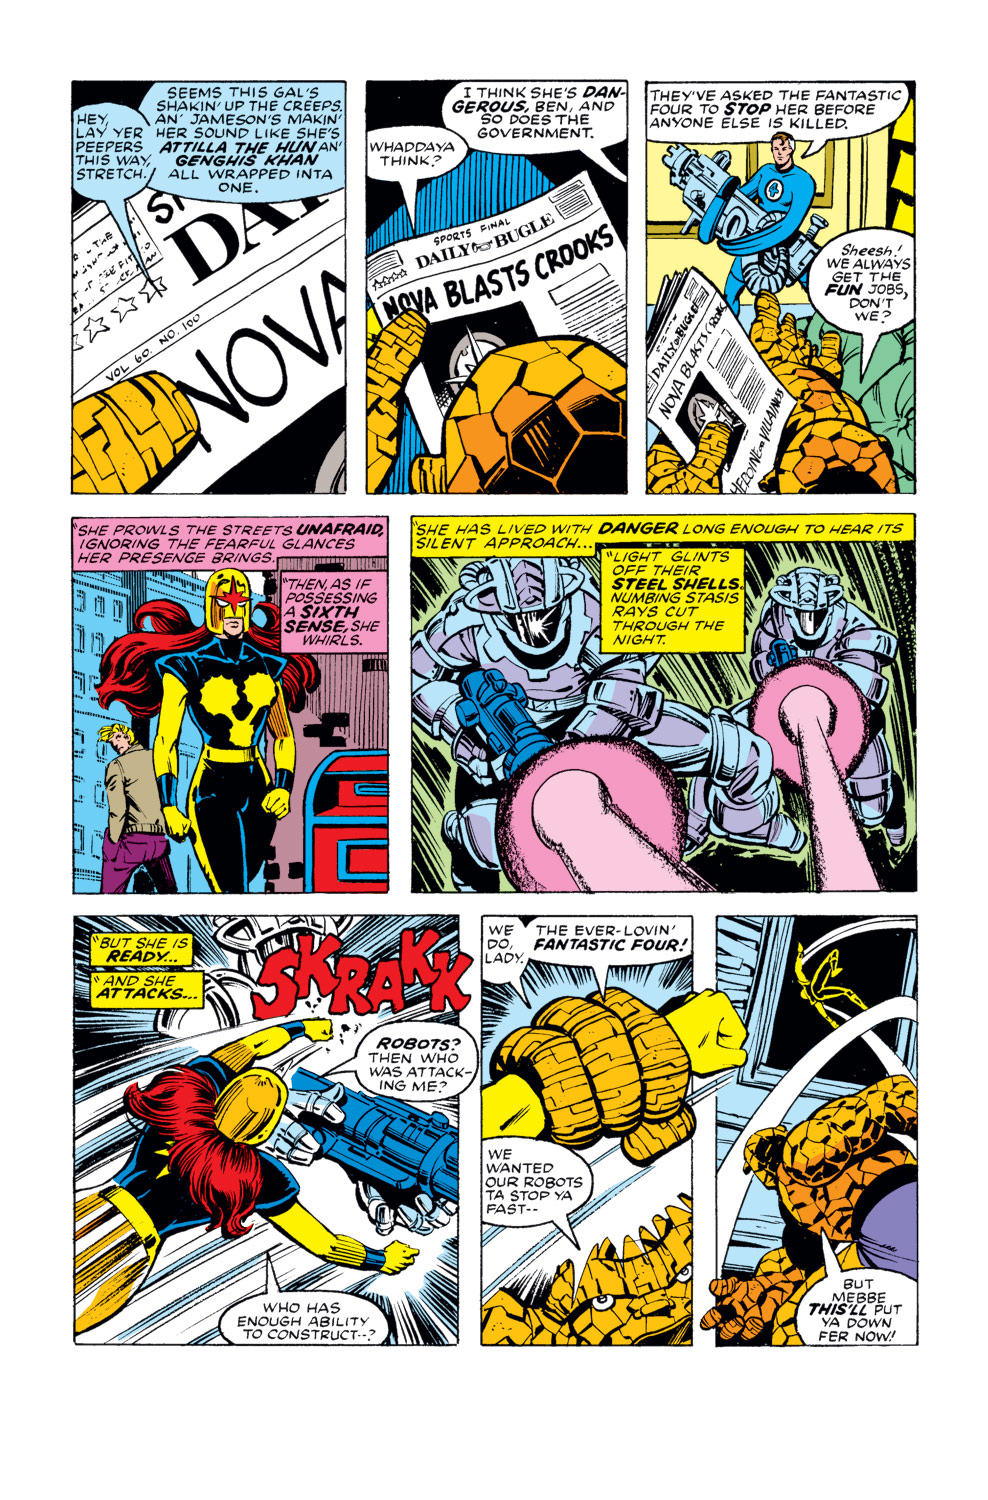 What If? (1977) issue 15 - Nova had been four other people - Page 10